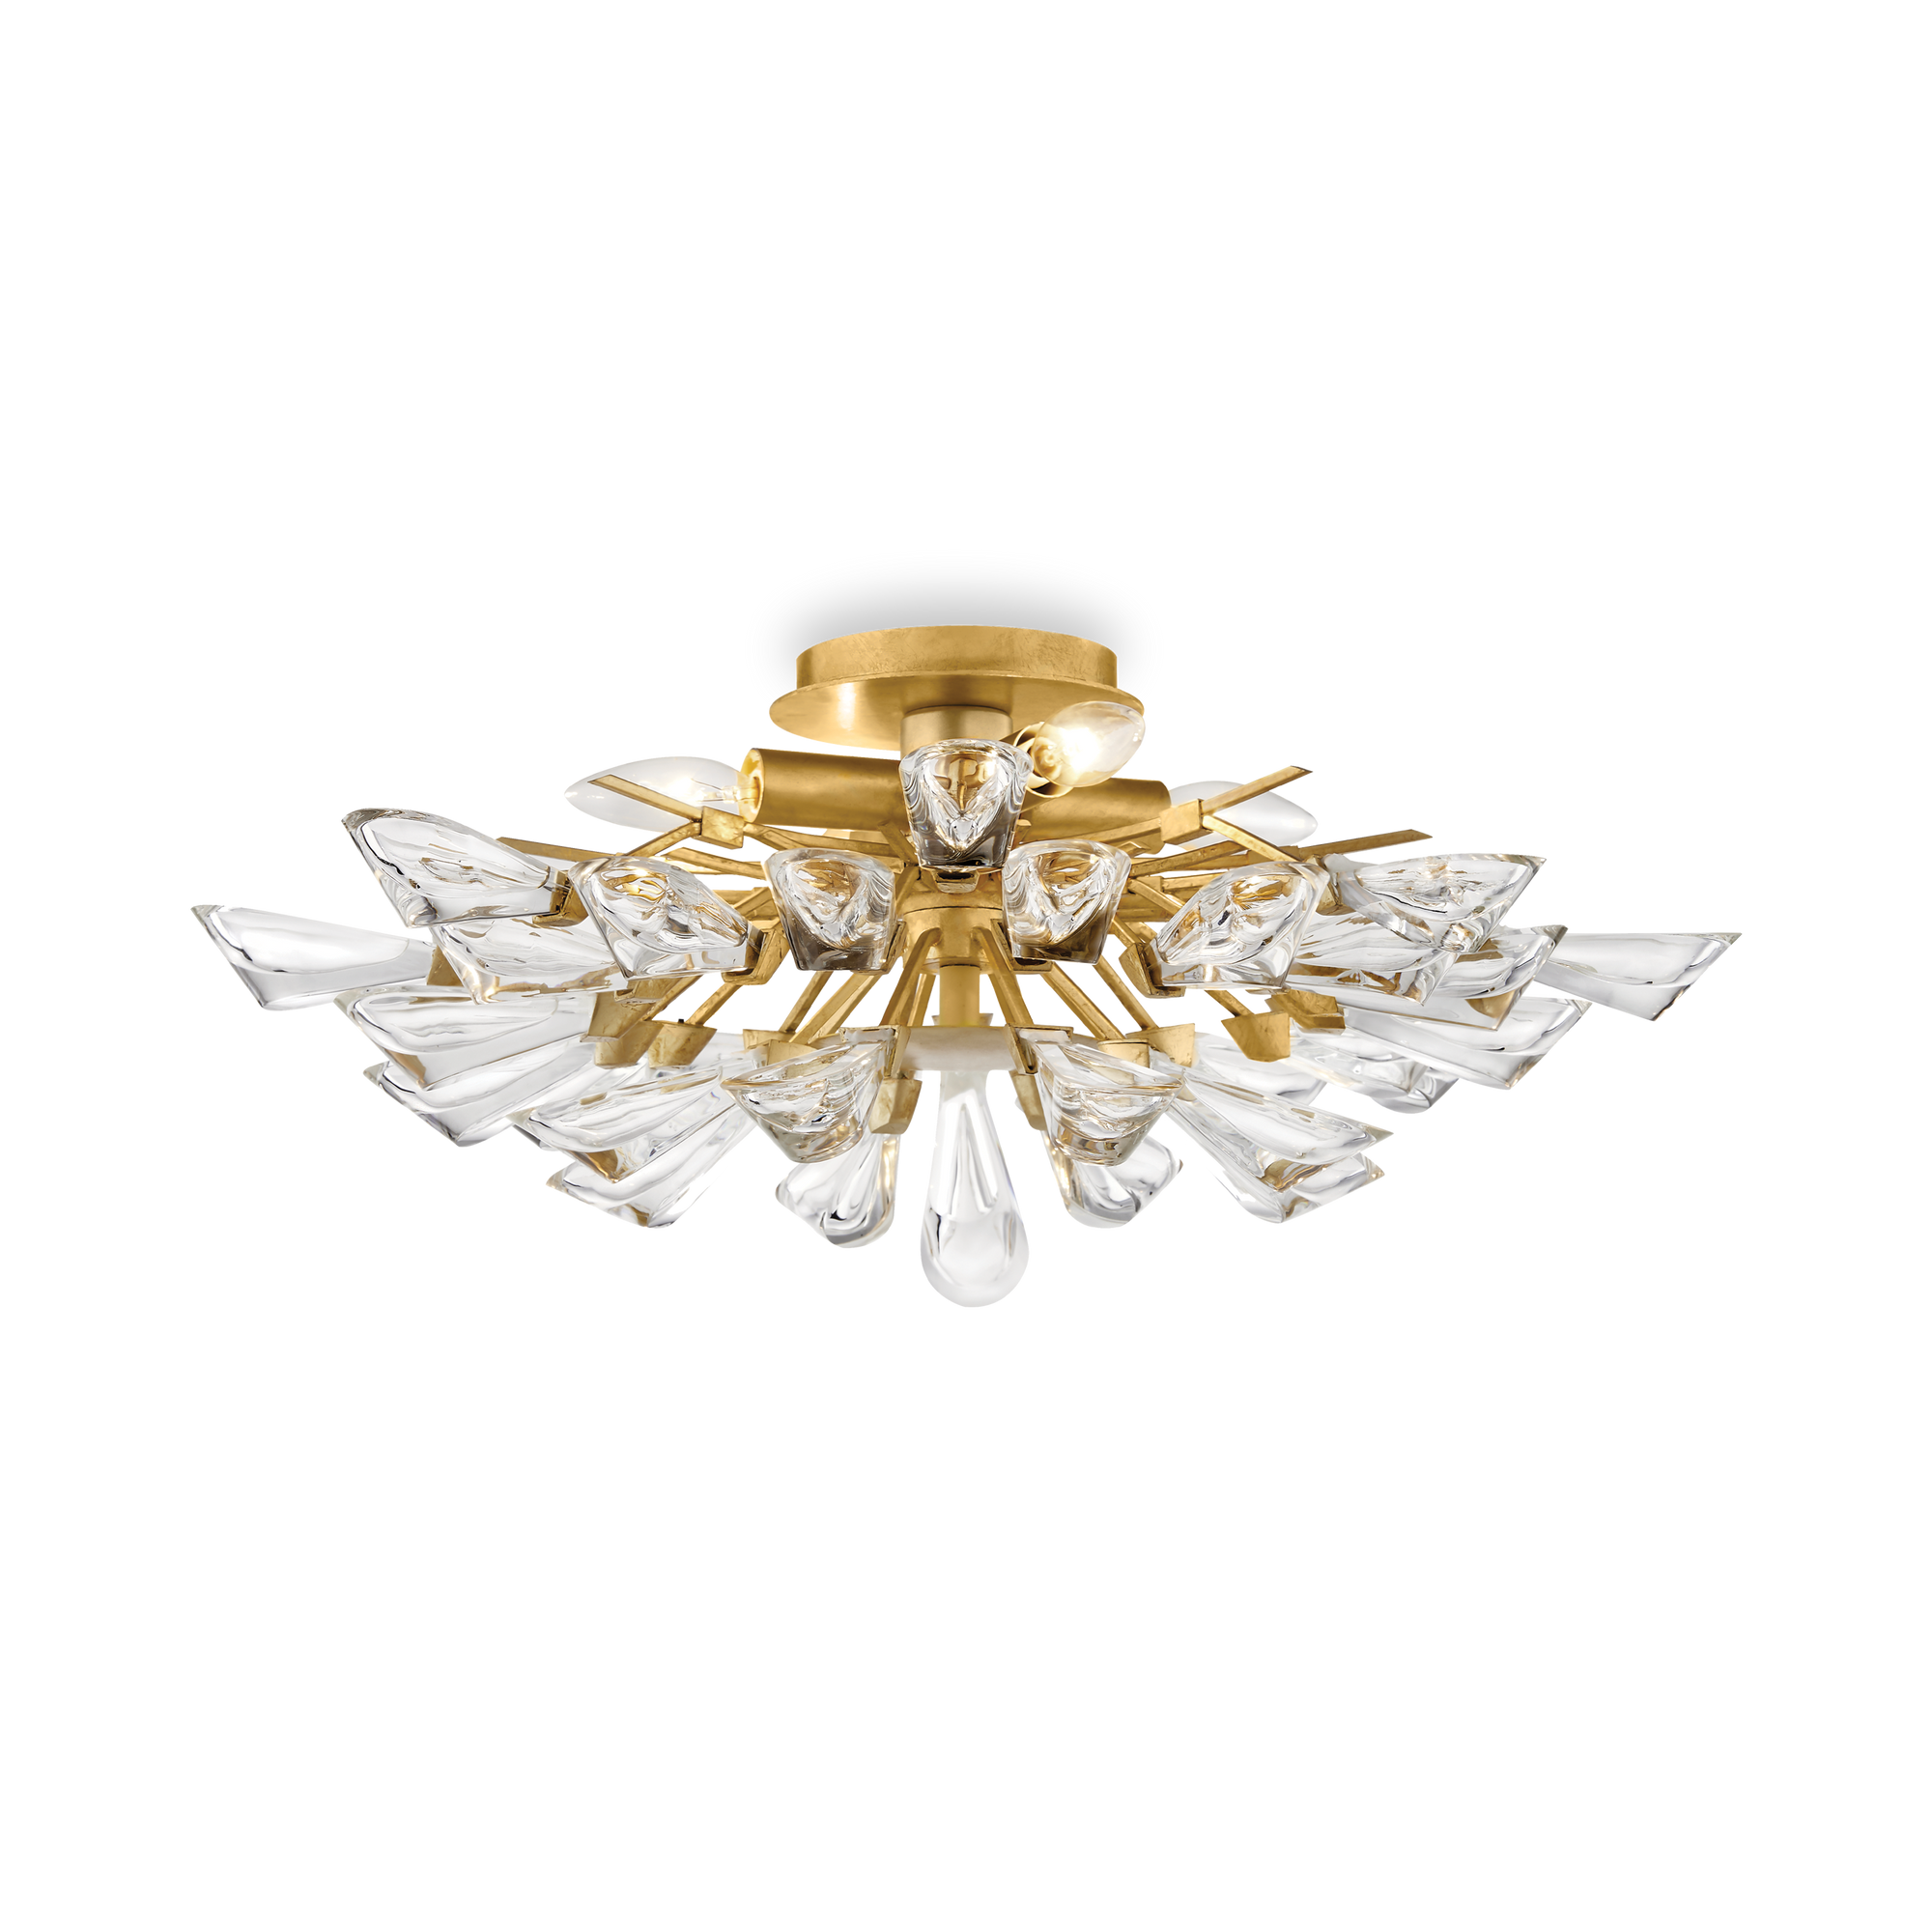 The Tulip Flush Mount features crystal shades with a gold leaf base.